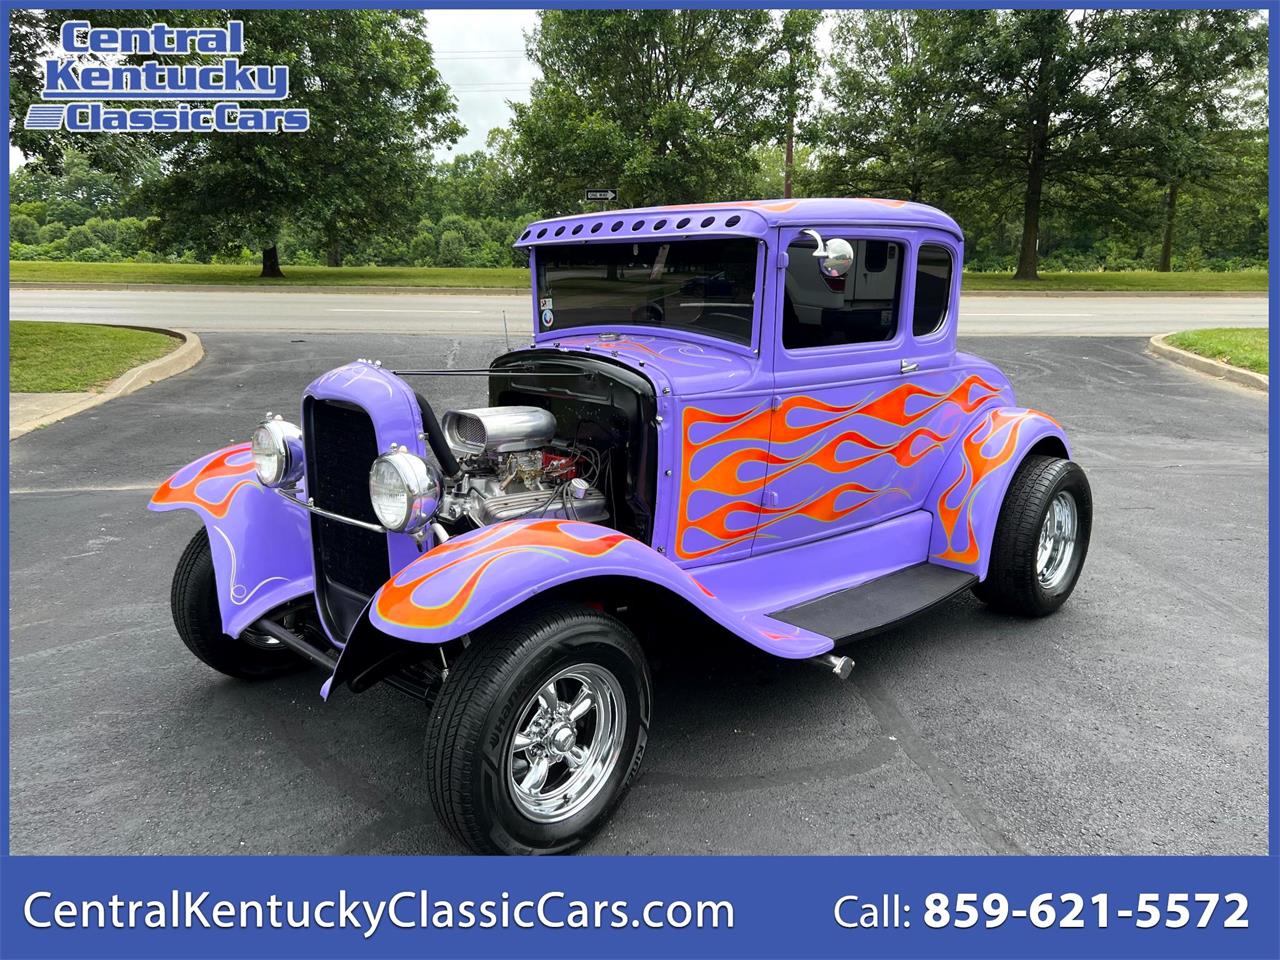 For Sale: 1931 Ford Model A in Paris , Kentucky for sale in Paris, KY